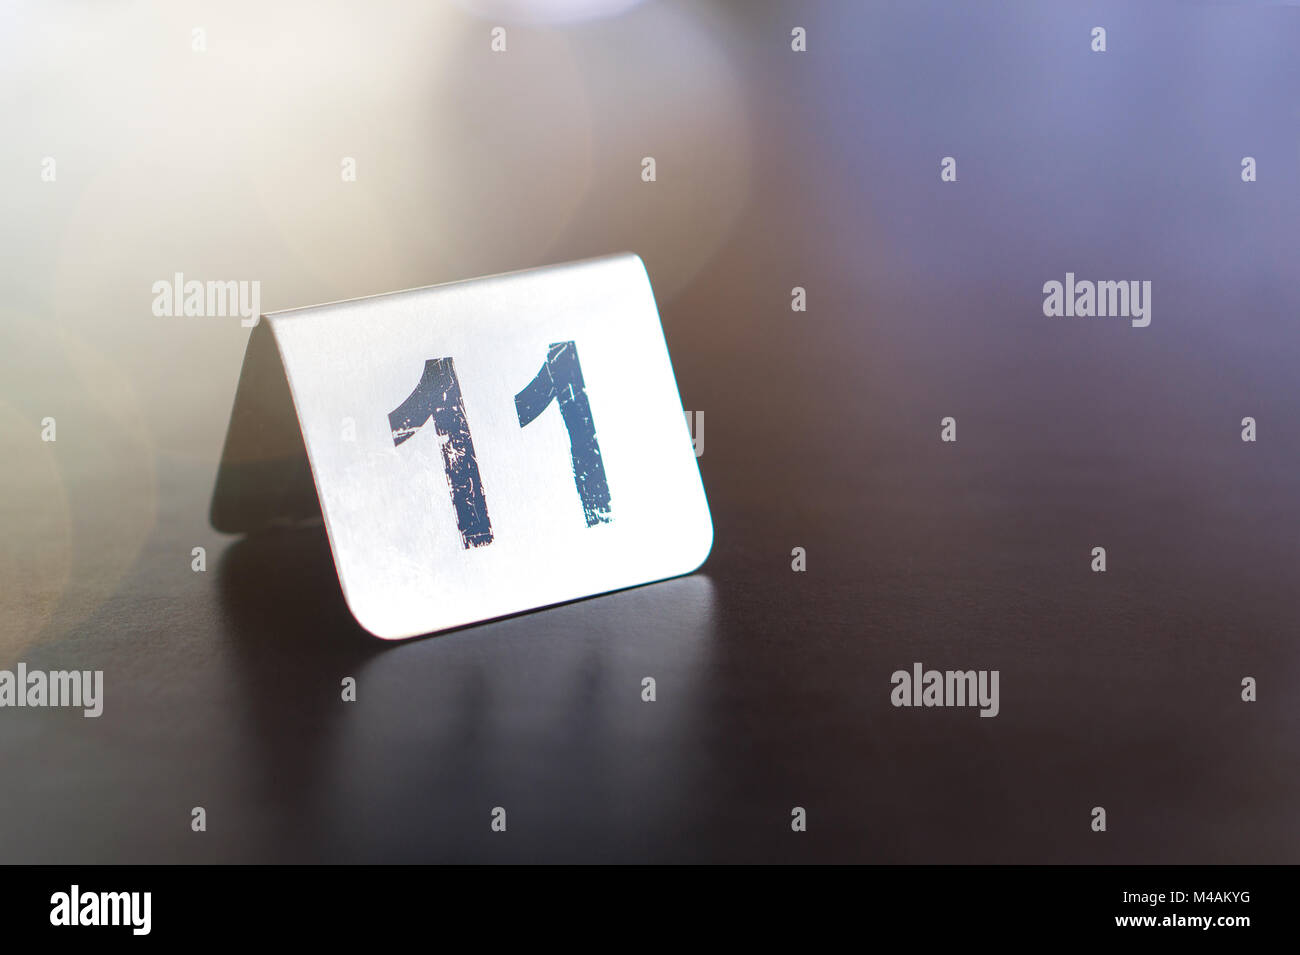 Number sign on restaurant table to show reservation. Customer waiting for service or food. Stock Photo